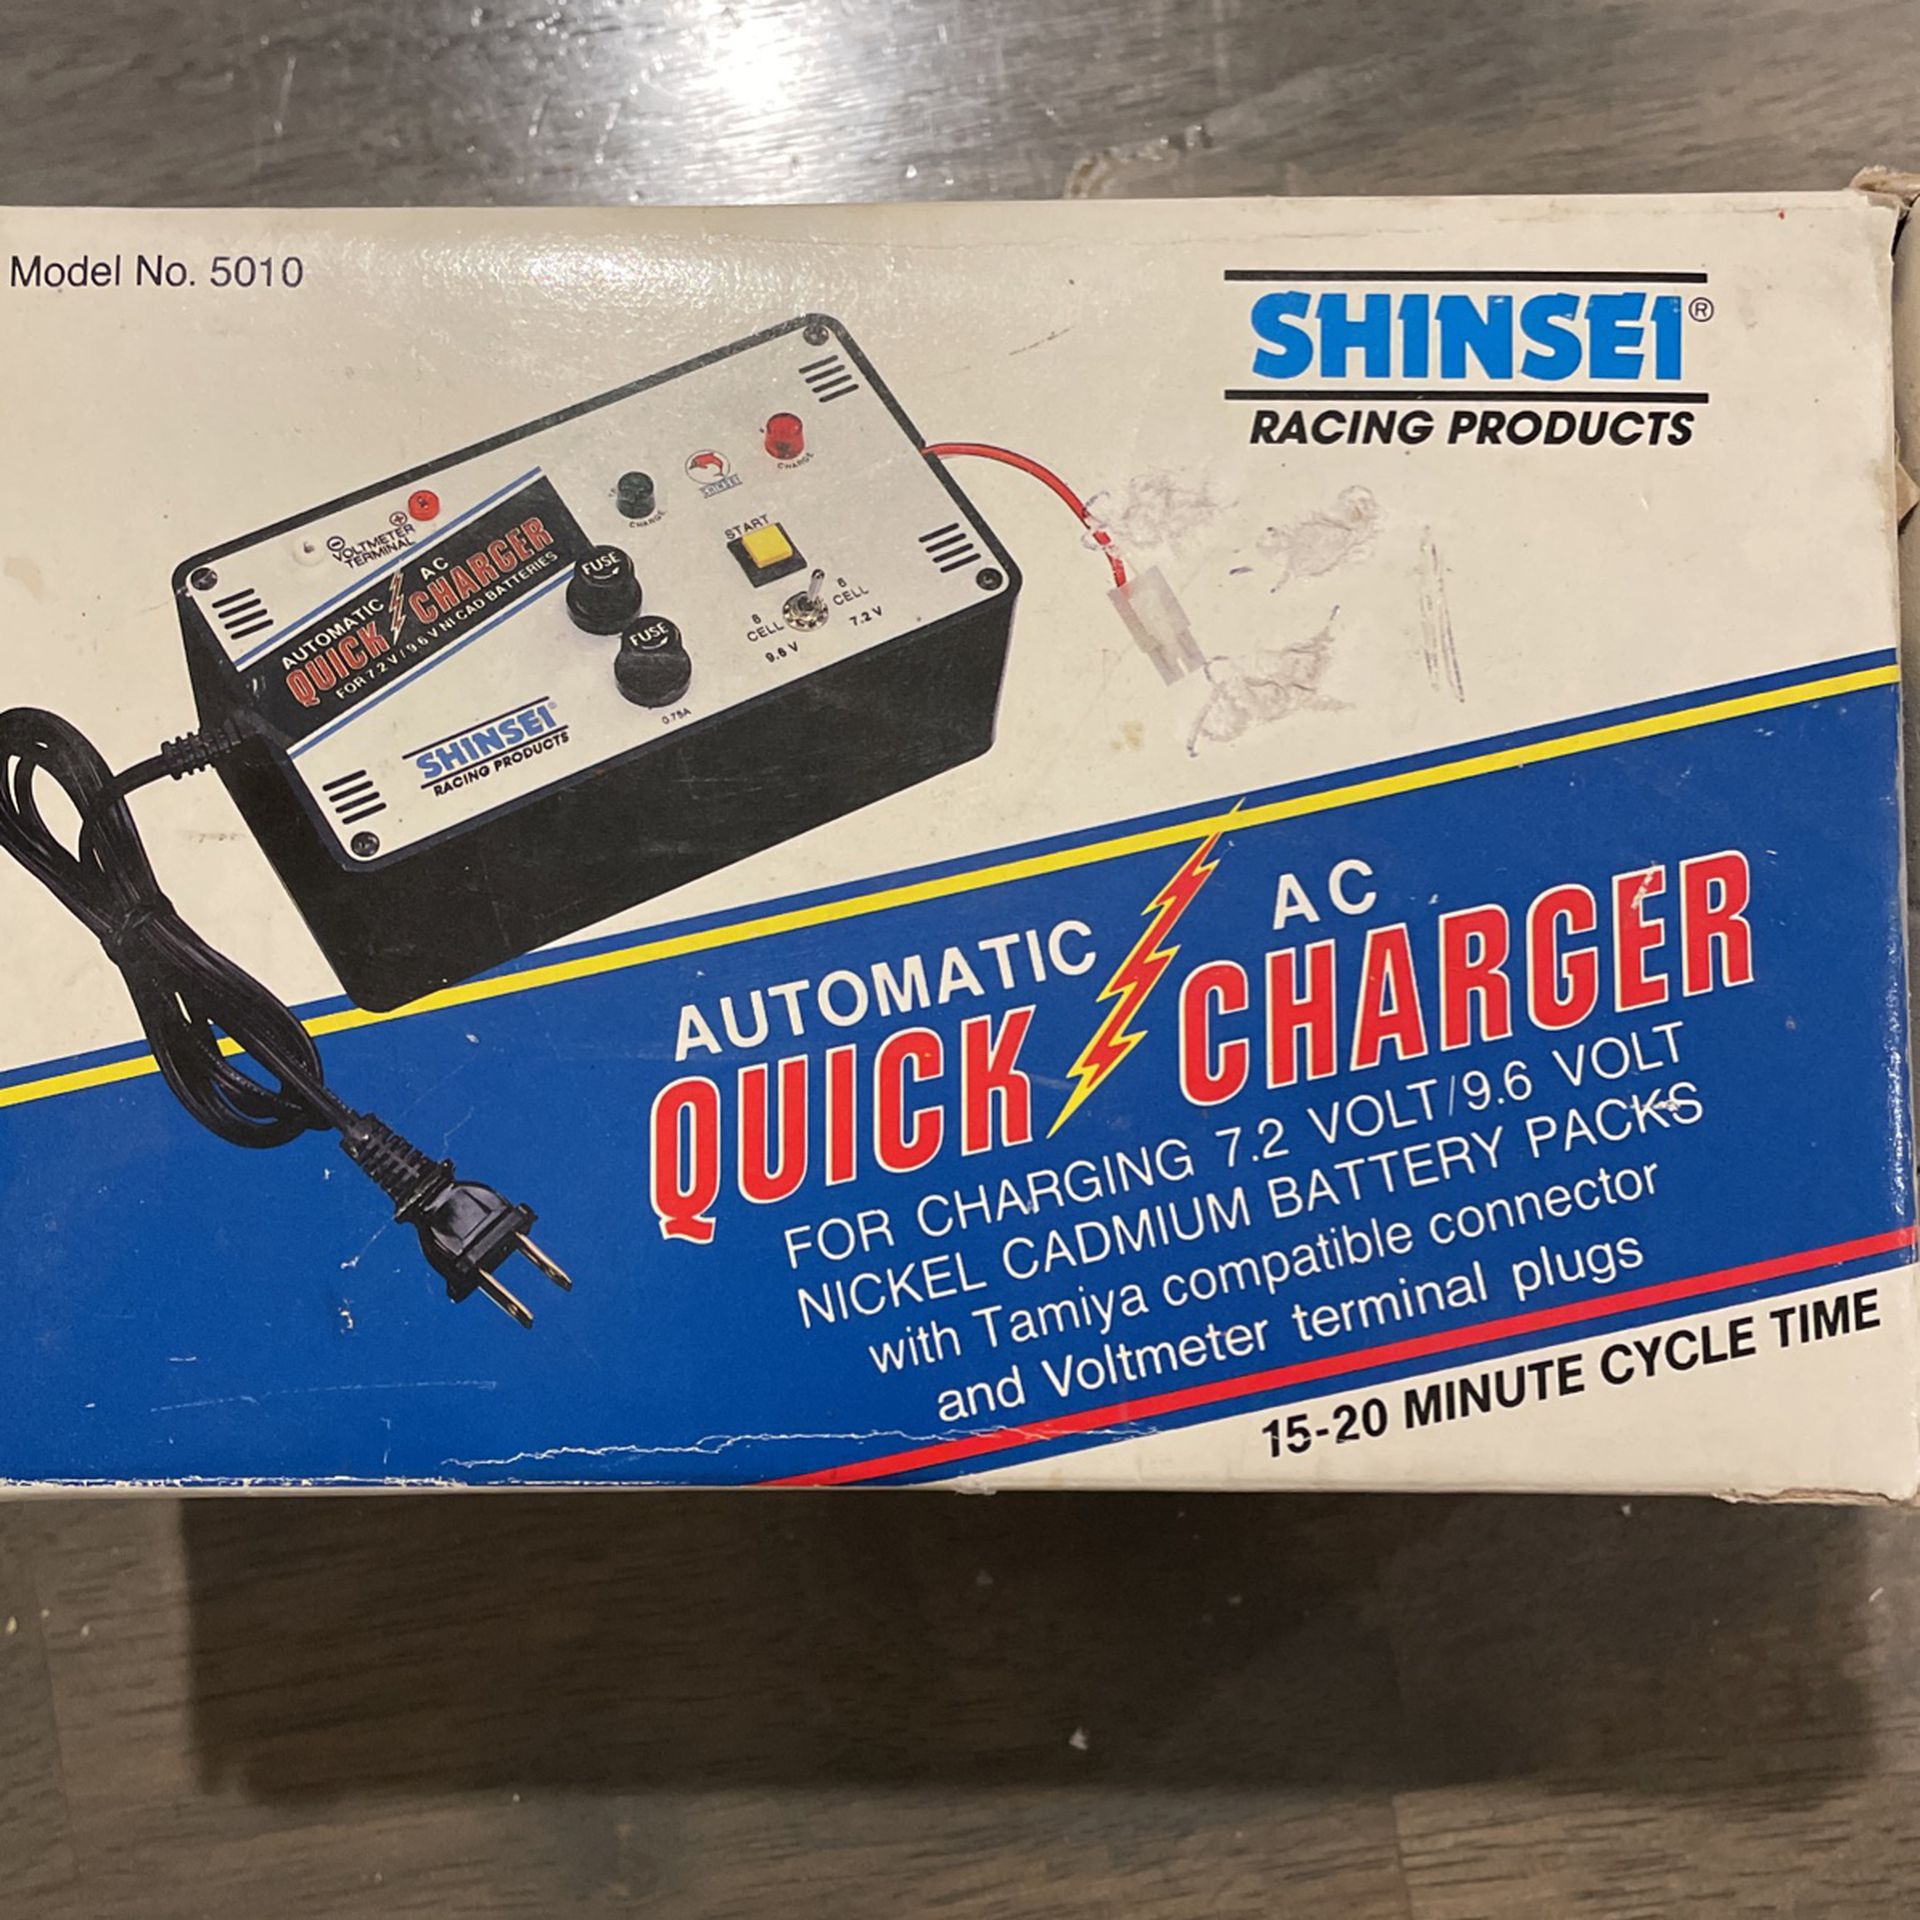 AC Quick charger For 7.2 Volt NiCad Battery Packs